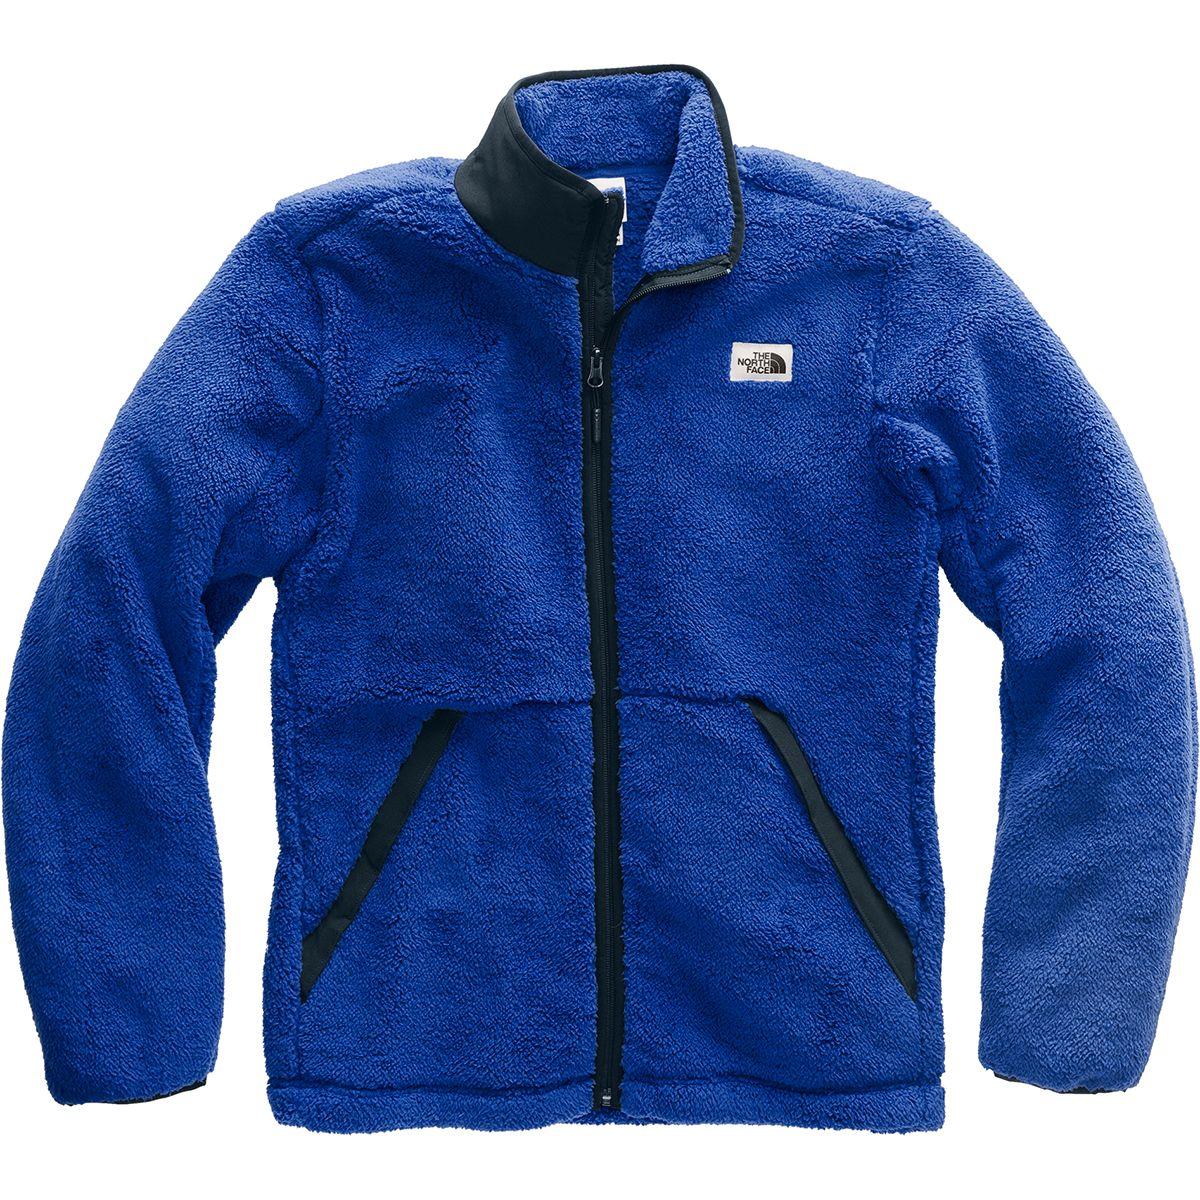 The North Face Campshire Full-zip Fleece Jacket in Blue for Men - Lyst